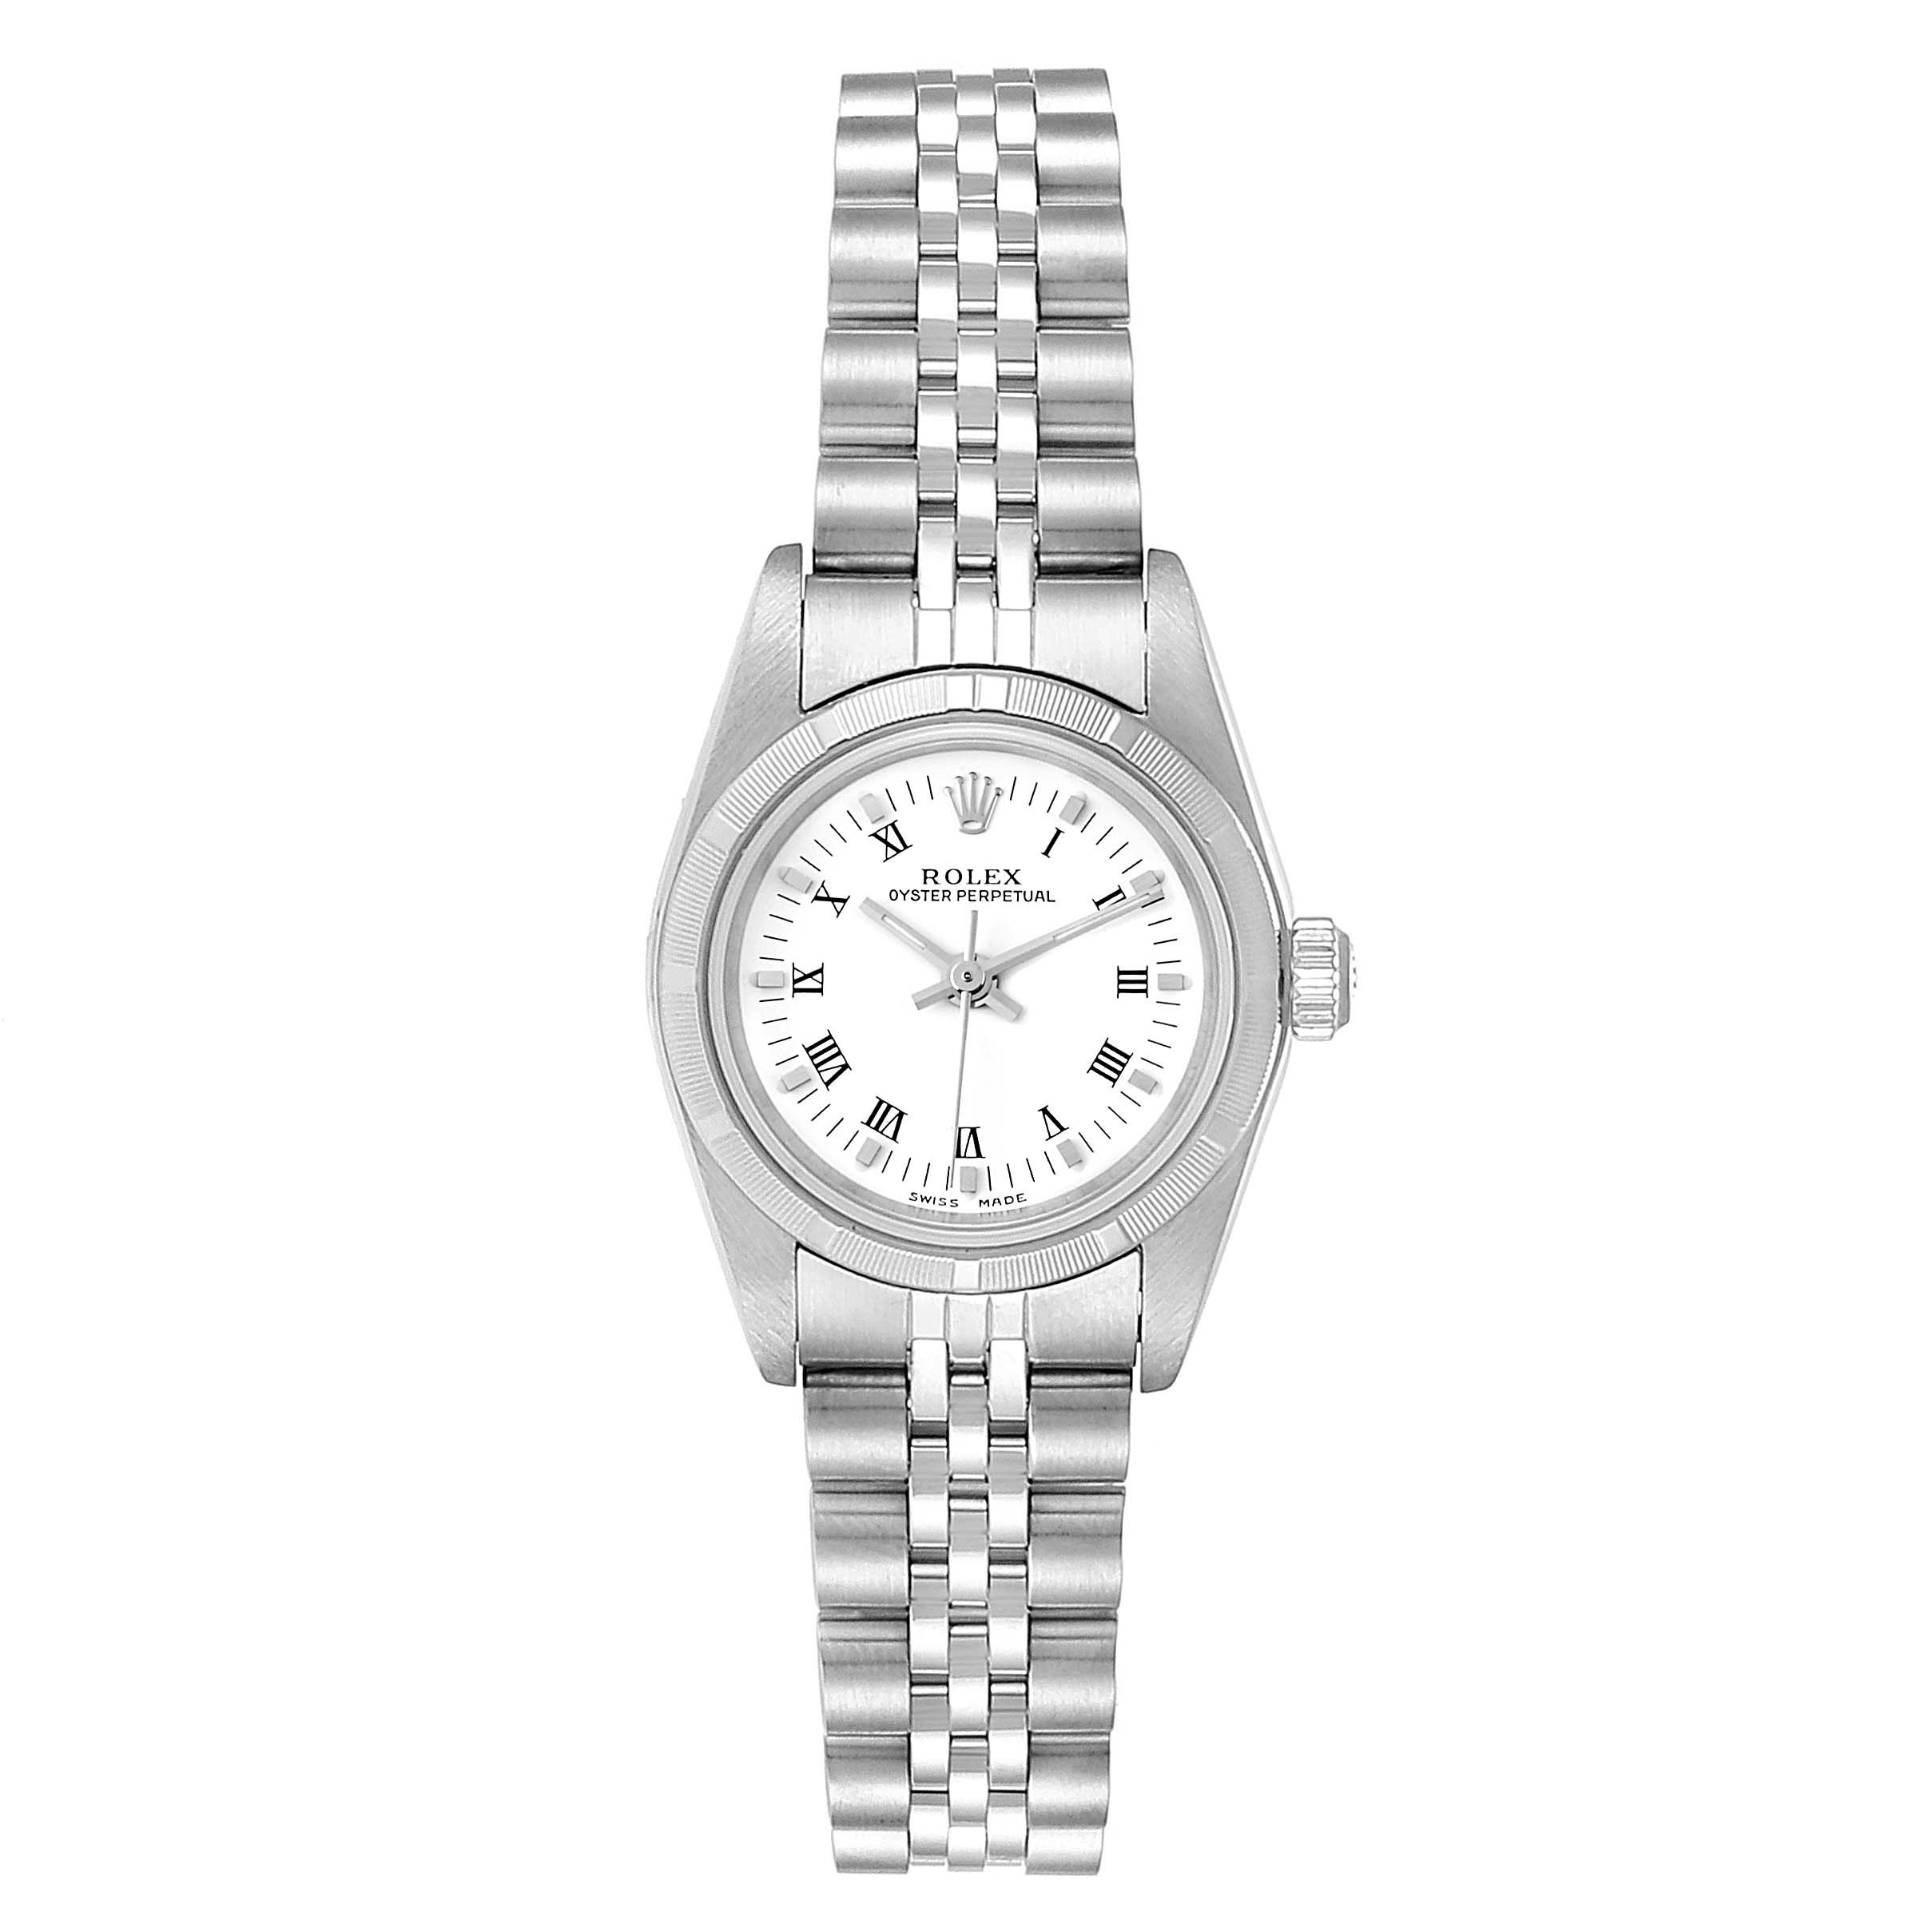 Rolex Oyster Perpetual White Dial Steel Ladies Watch 76030 Box ...